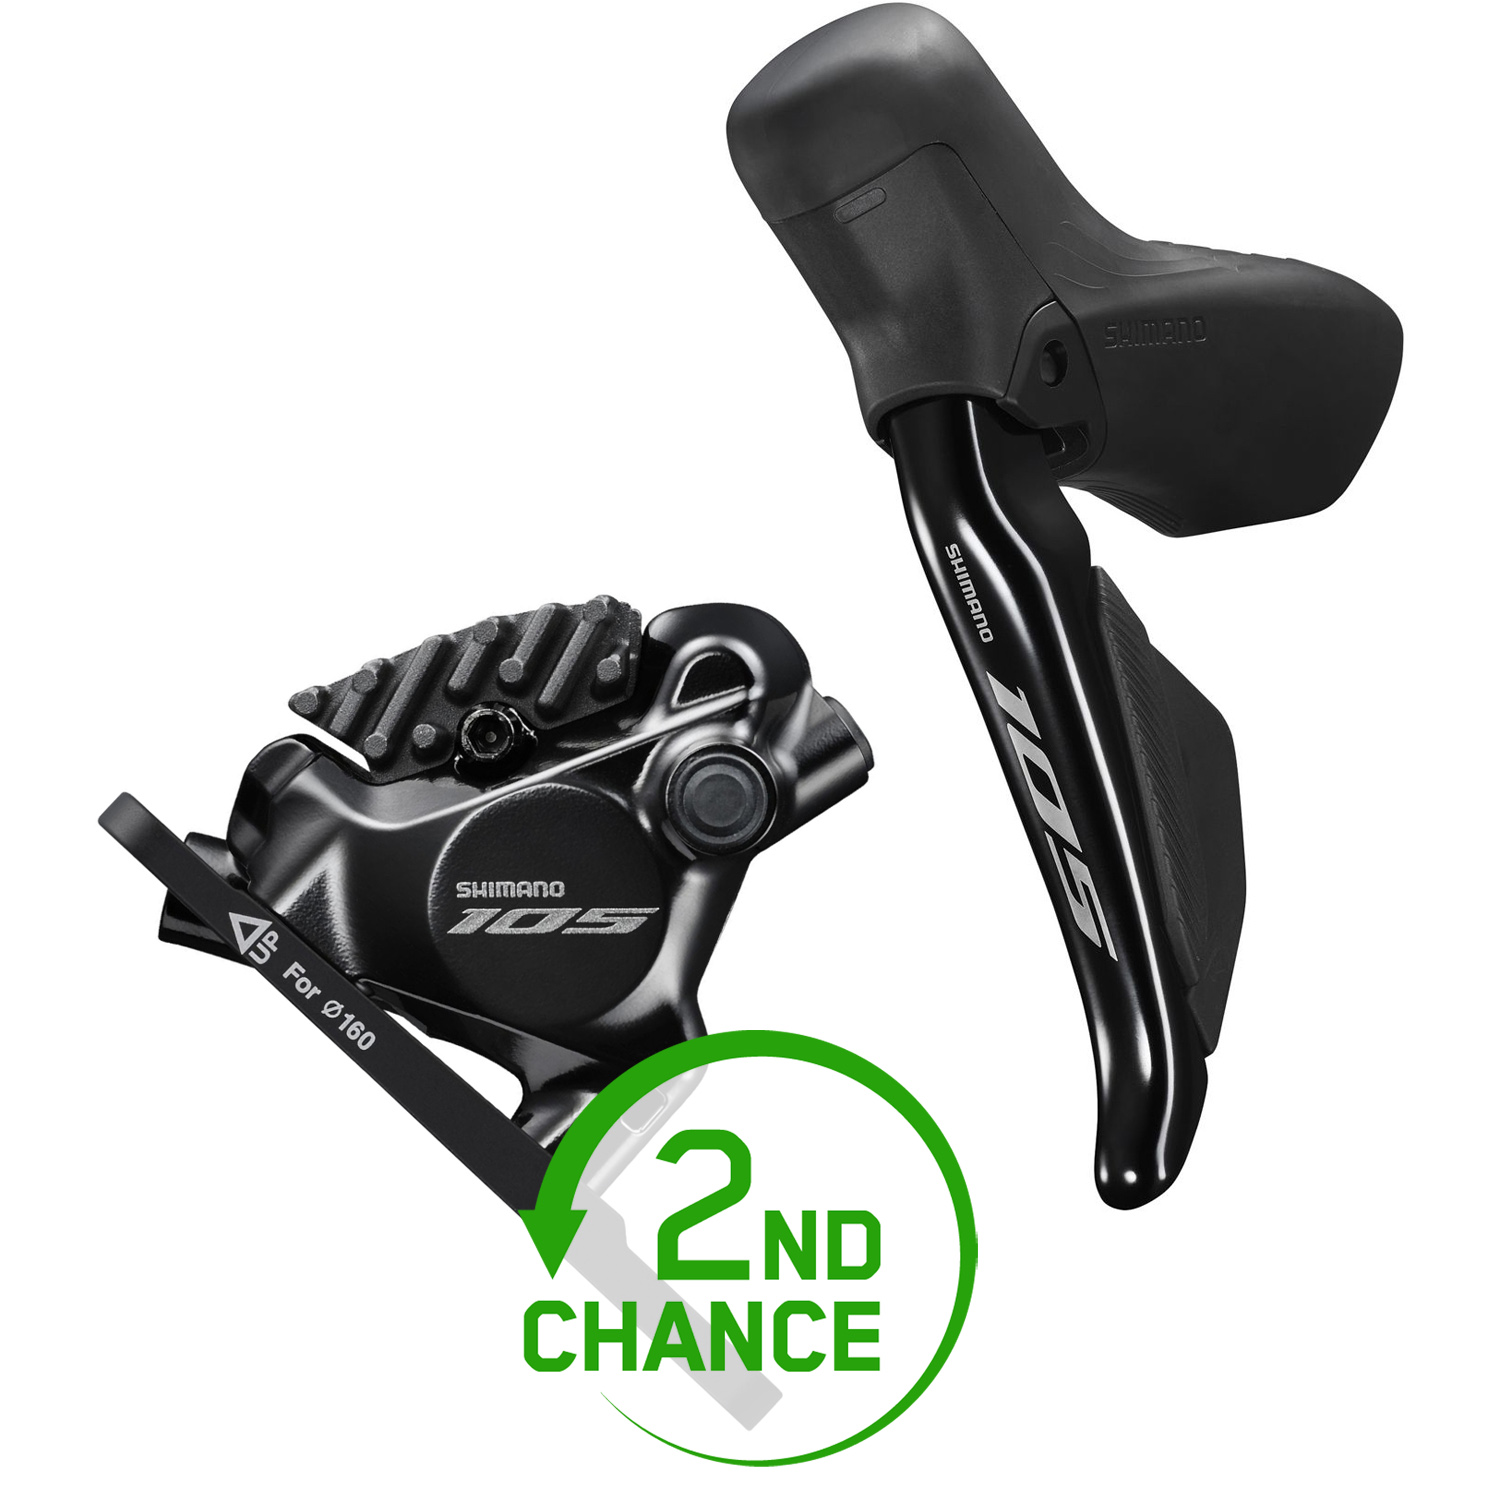 Picture of Shimano 105 ST-R7170 + BR-R7170 Hydraulic Disc Brake - Di2 | 2x12-speed - Set FW - shortened to 30cm - 2nd Choice